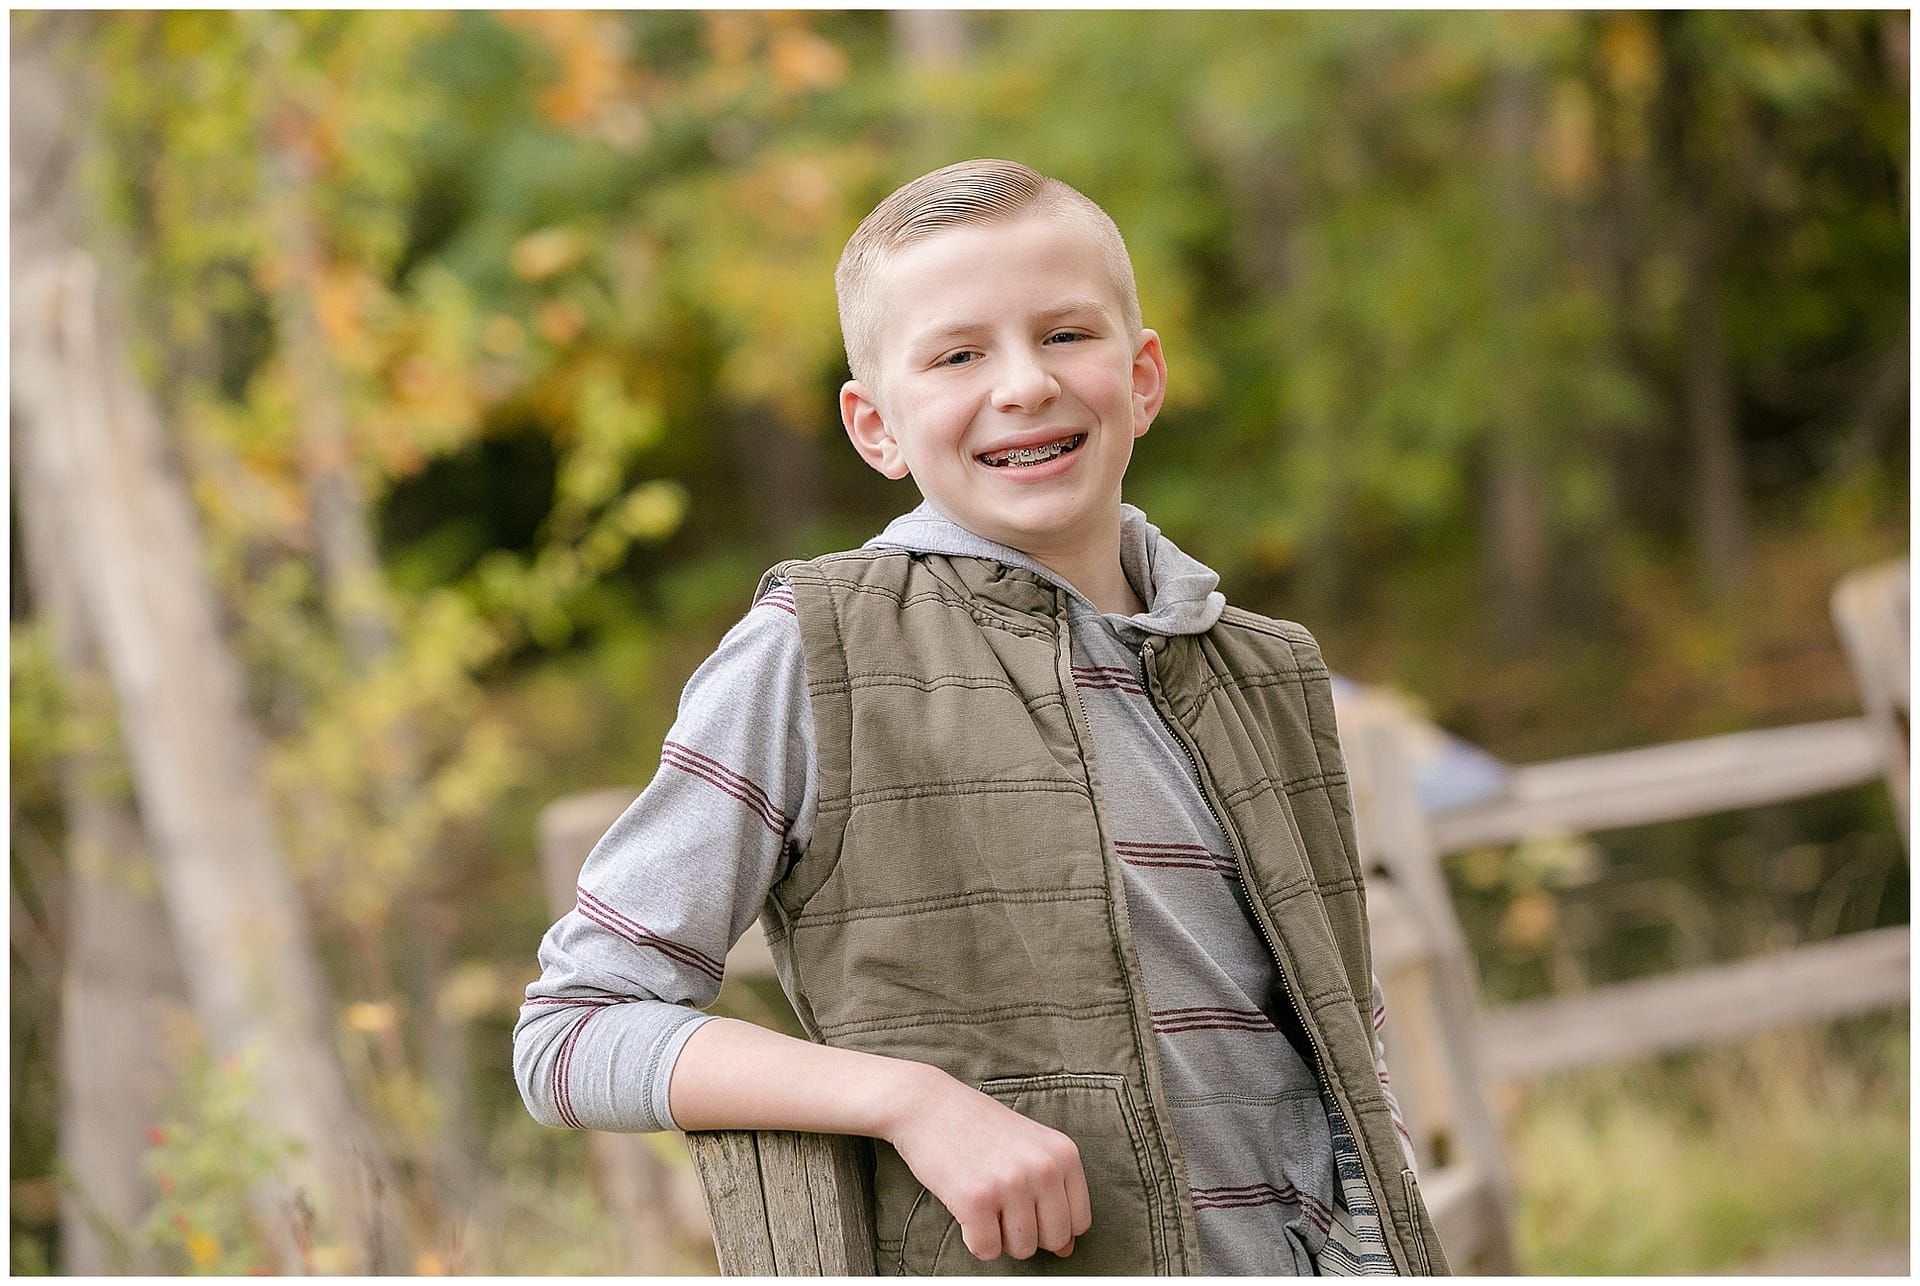 Young boy poses for portrait. Photo by Tiffany Hix Photography.